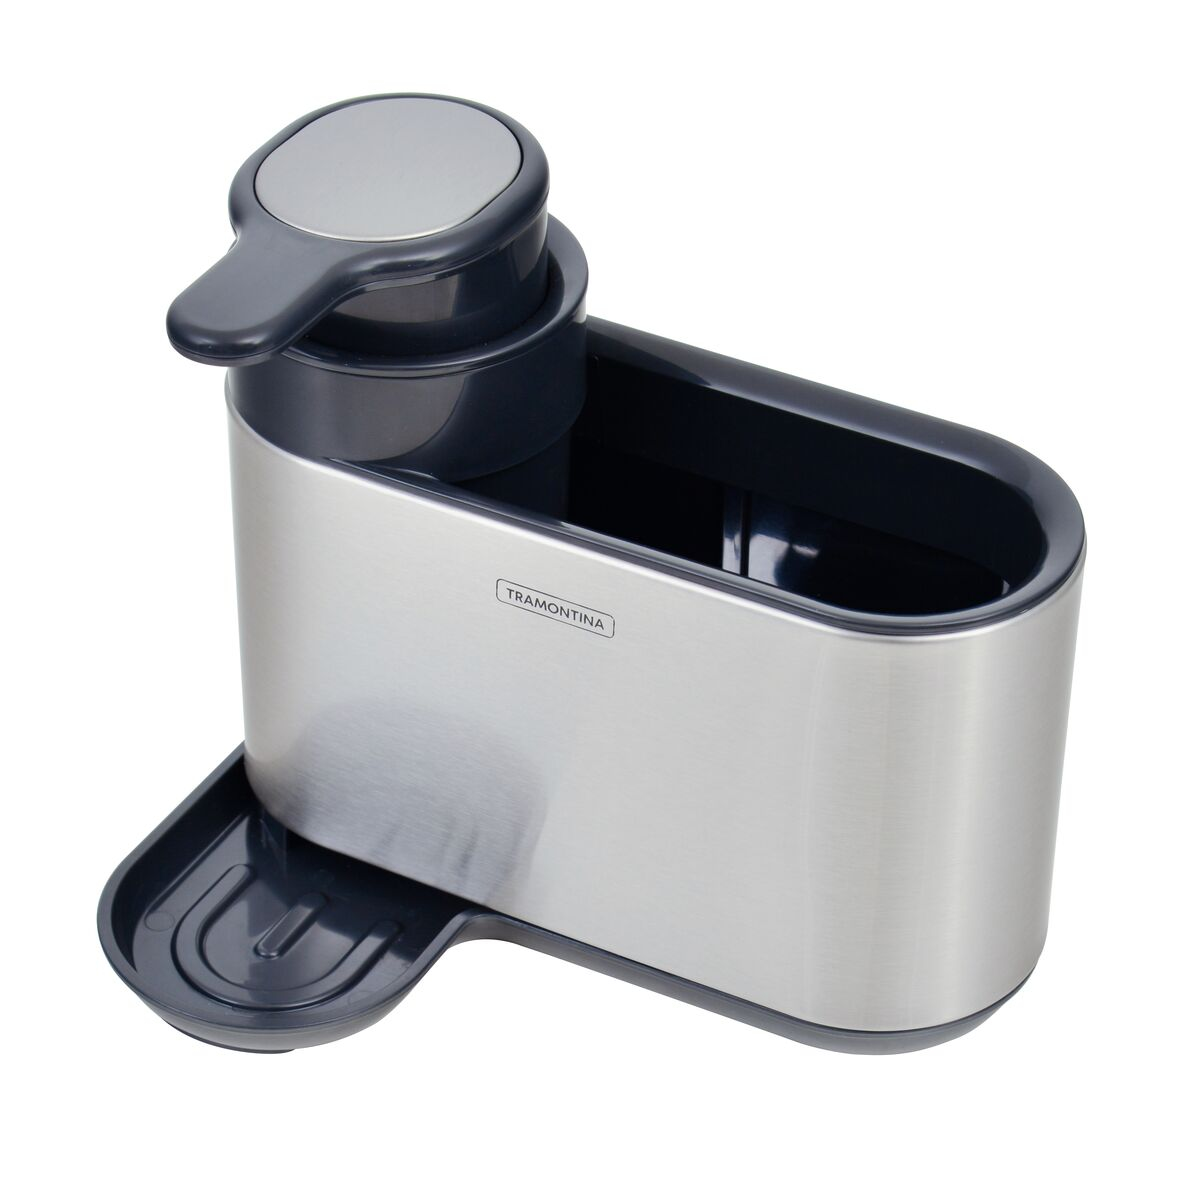 Tramontina's Sponje container with Soap Dispenser in Plastic and Stainless Steel